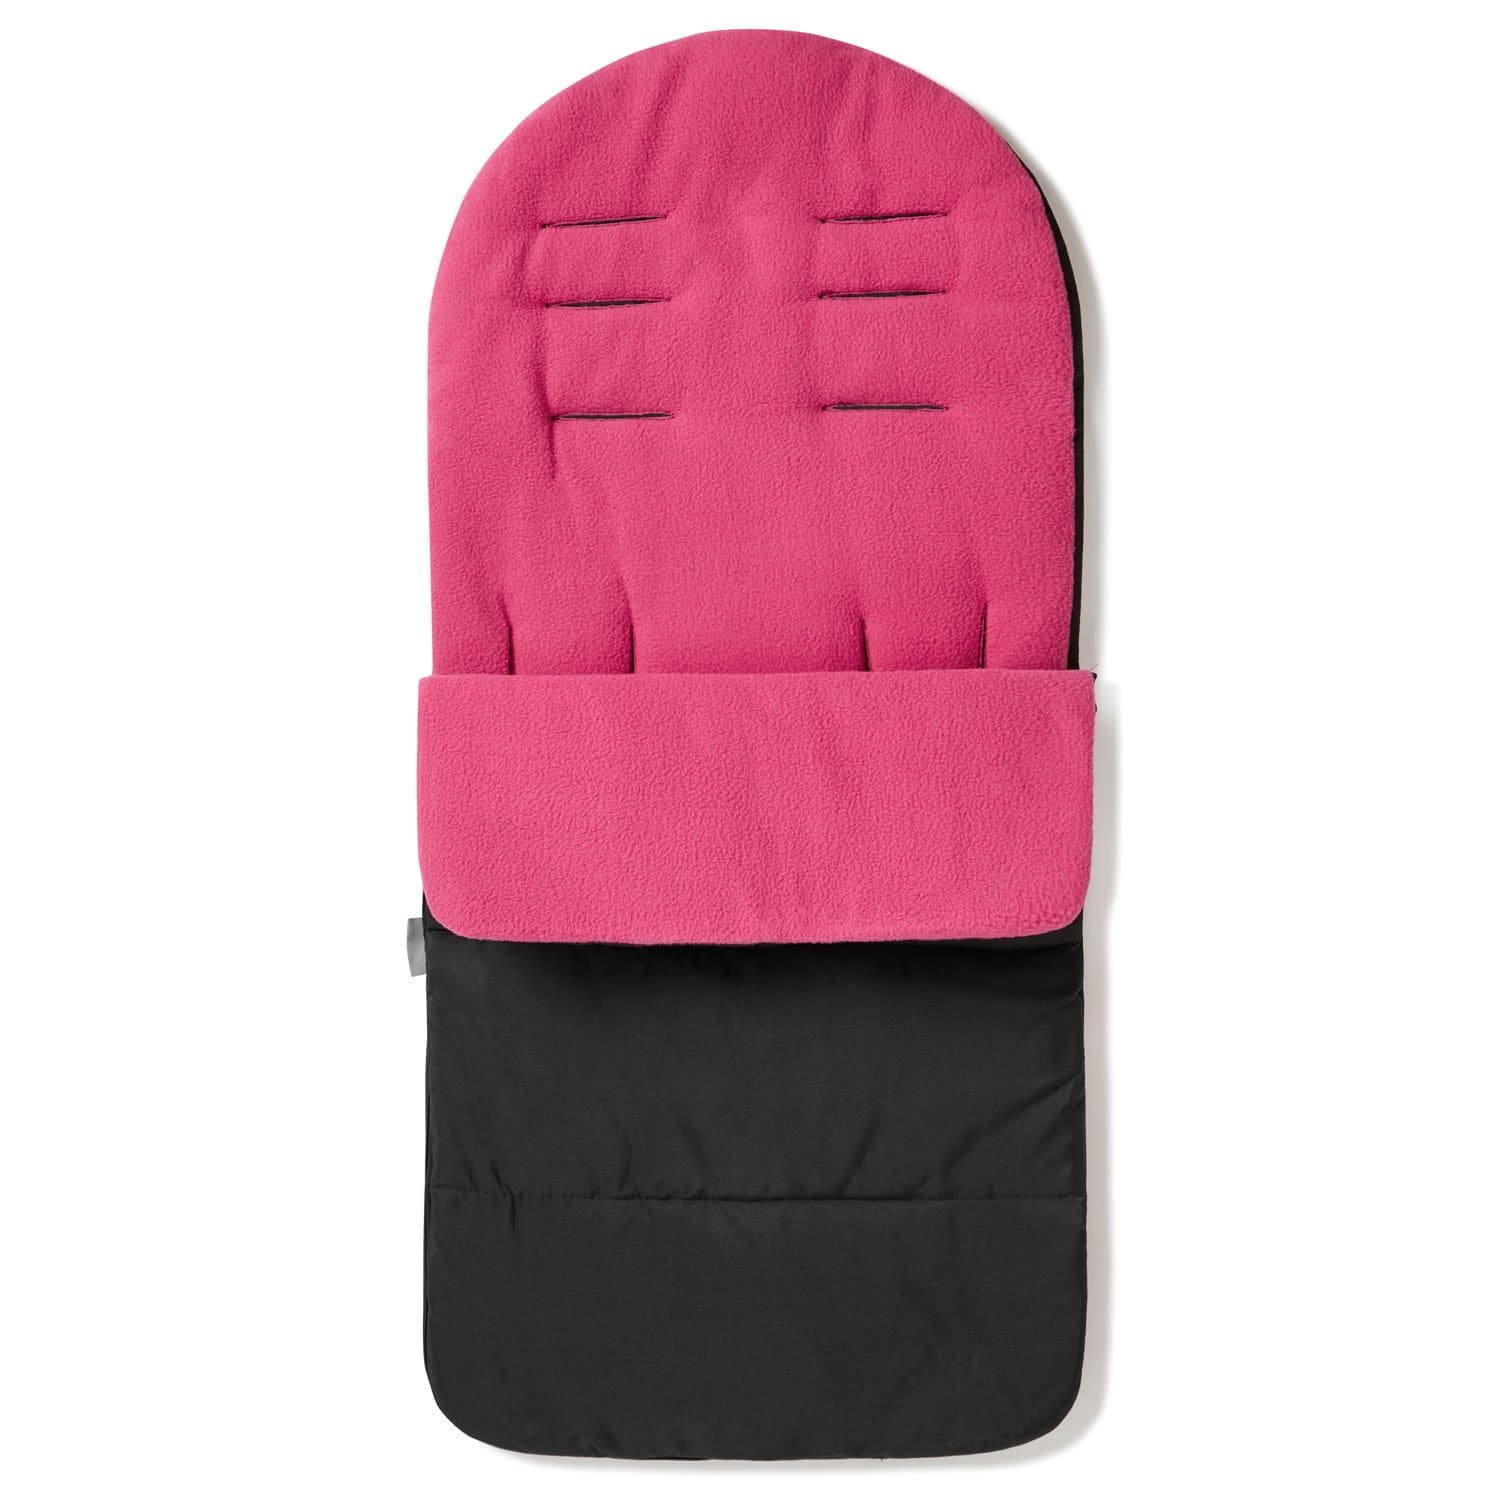 Premium Footmuff / Cosy Toes Compatible with Kinderkraft - Pink Rose / Fits All Models | For Your Little One